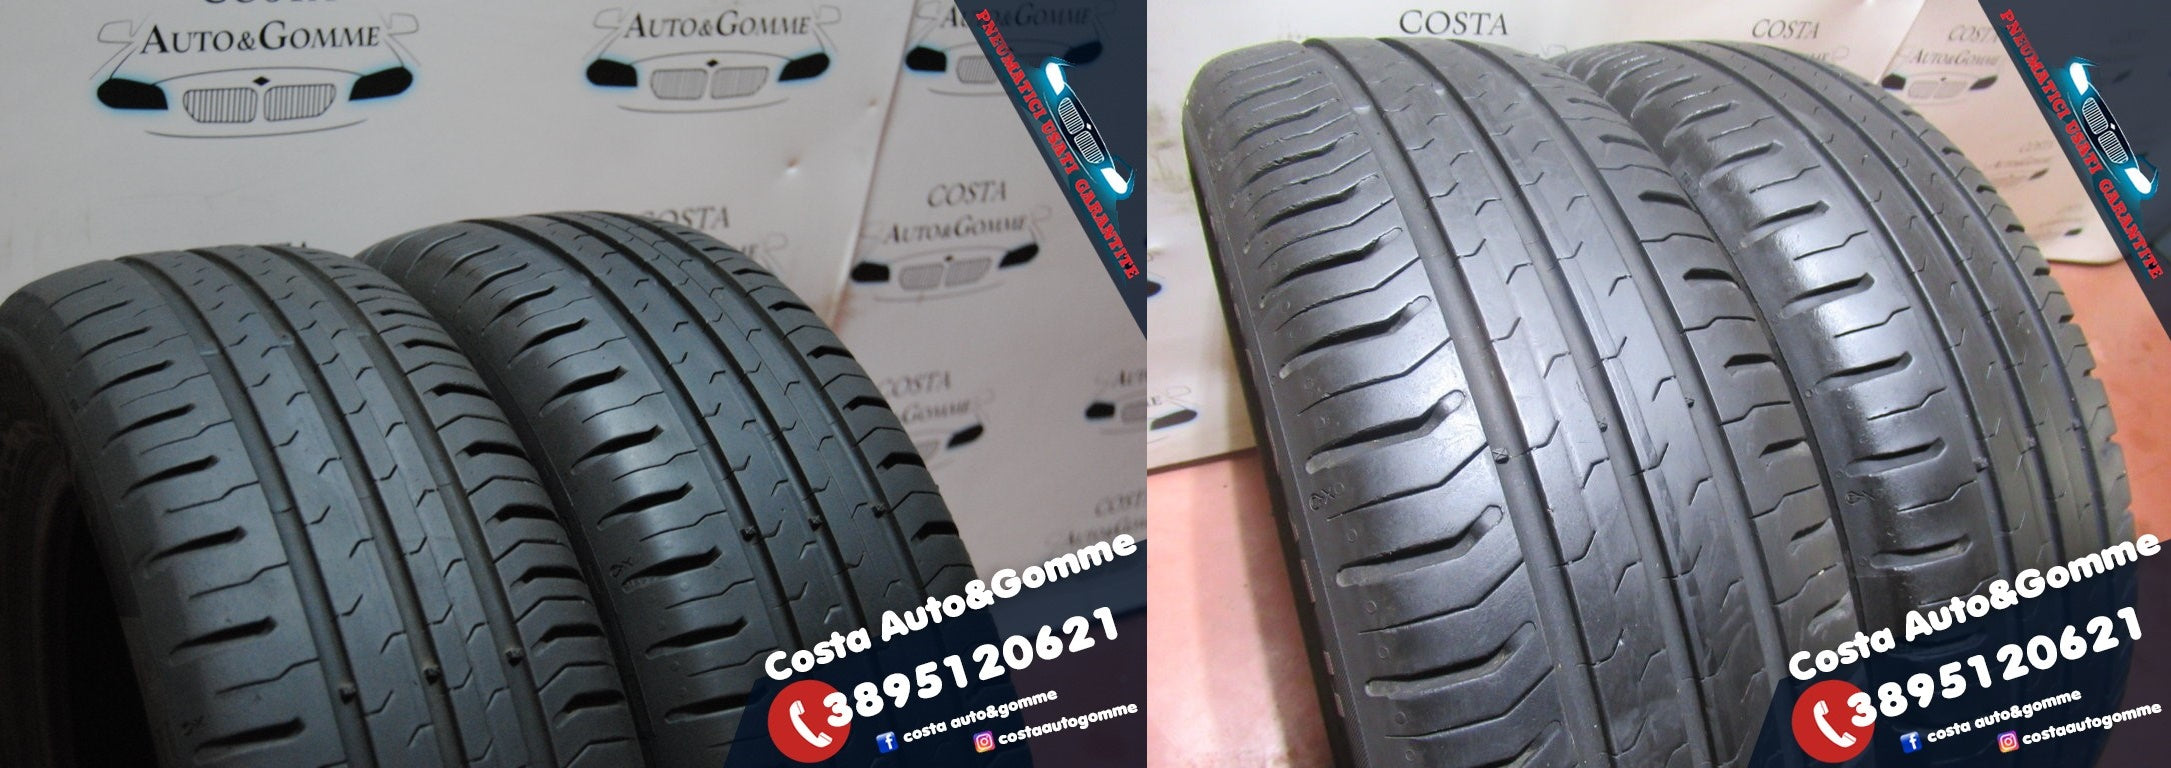 165 60 15 Continental 80%-90% 165 60 R15 4 Gomme